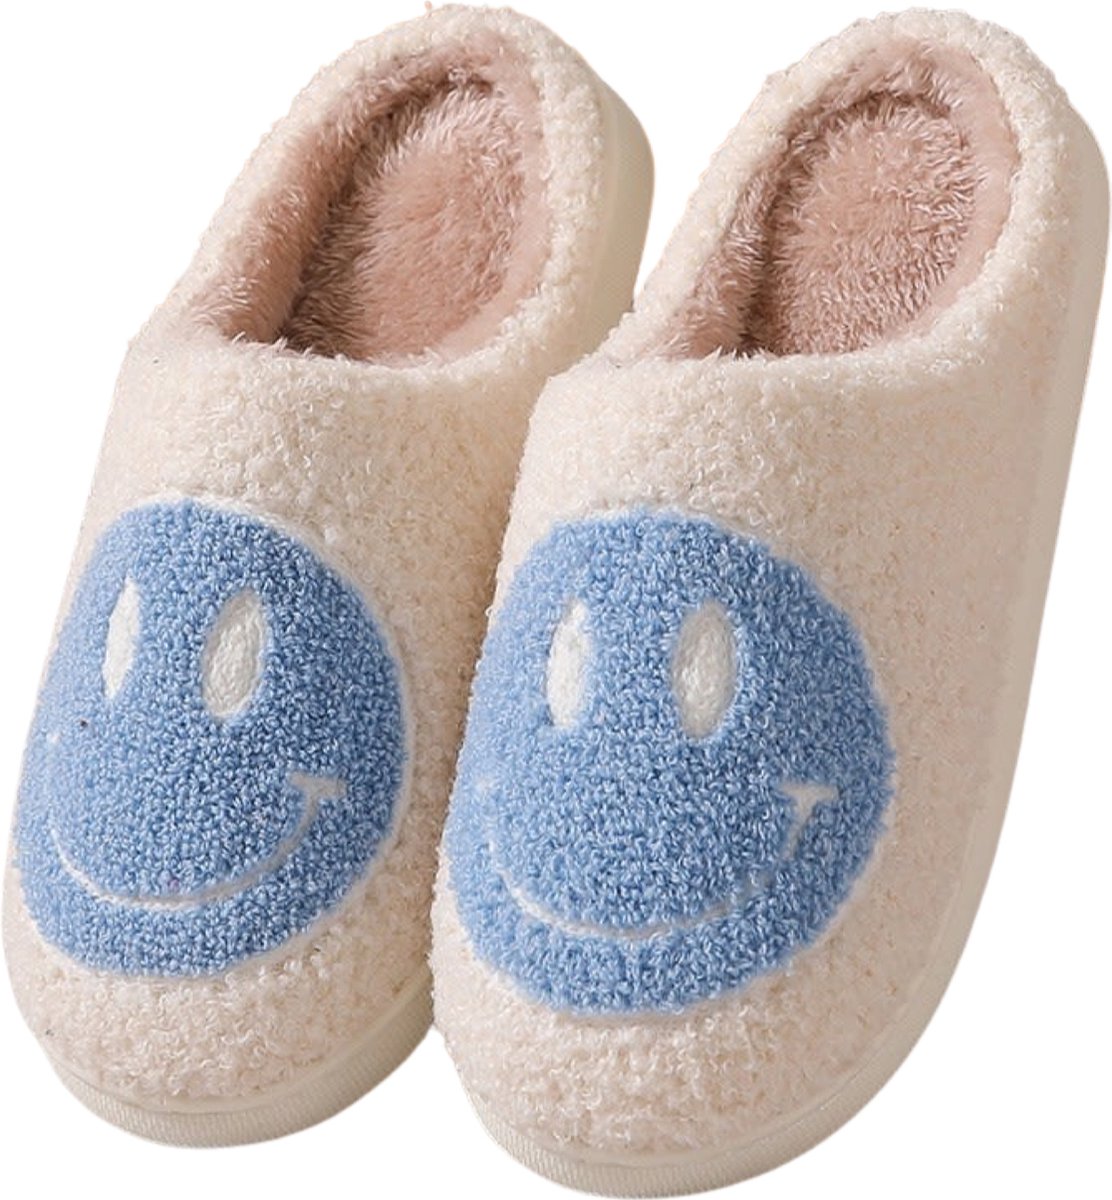 HAPPY SLIPPERS BLUE 42-43